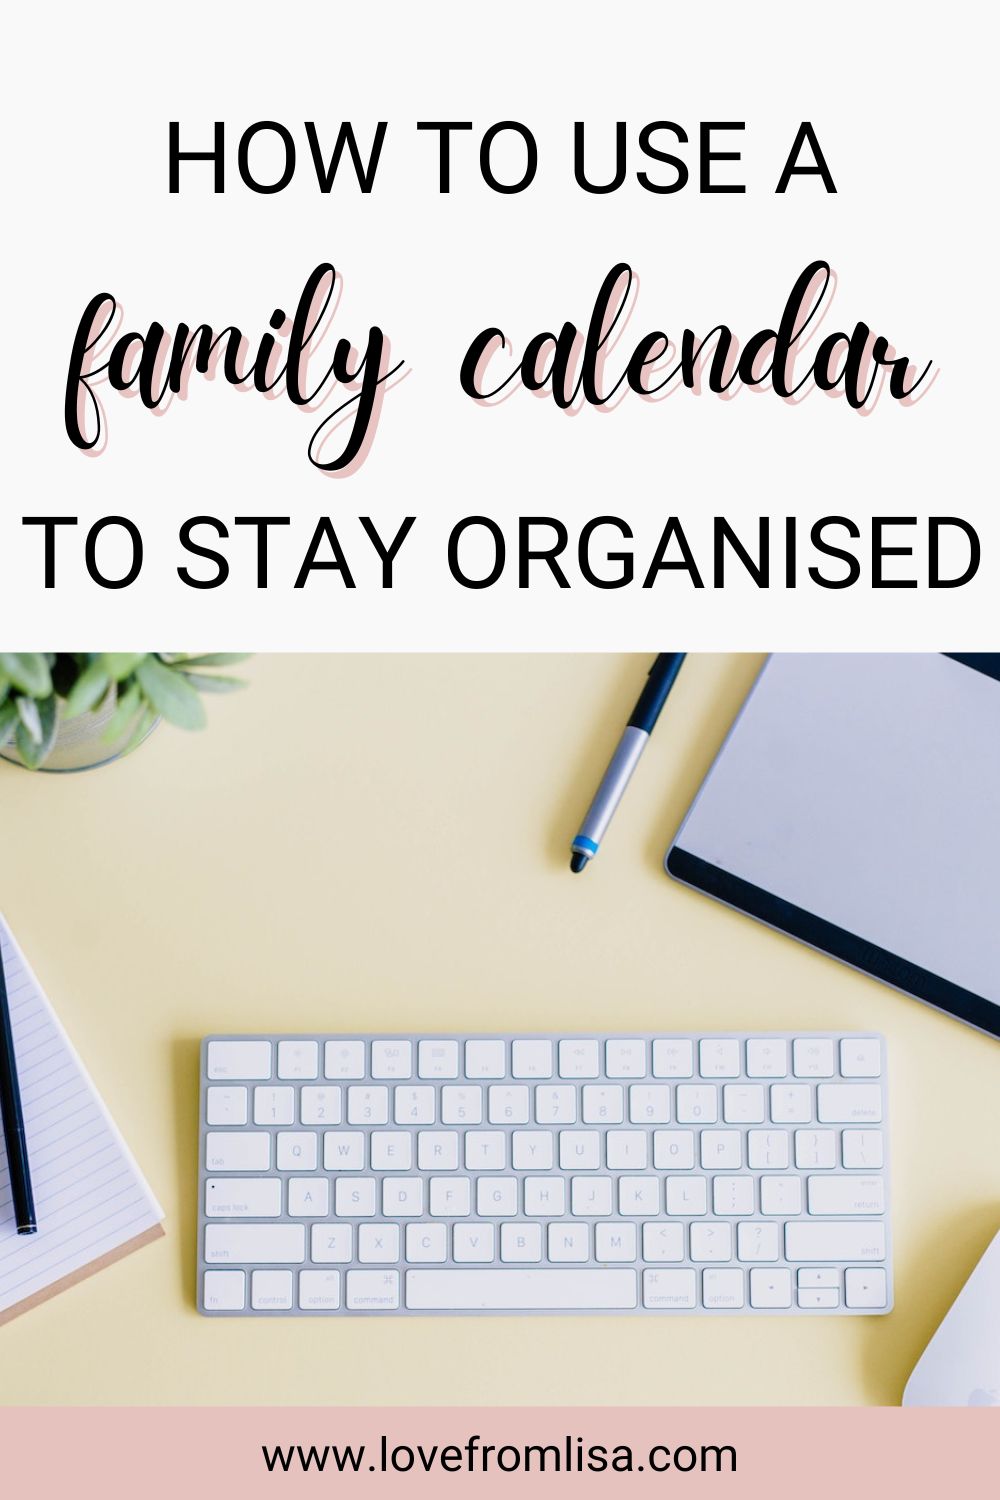 How to use a family calendar to stay organised Pinterest graphic